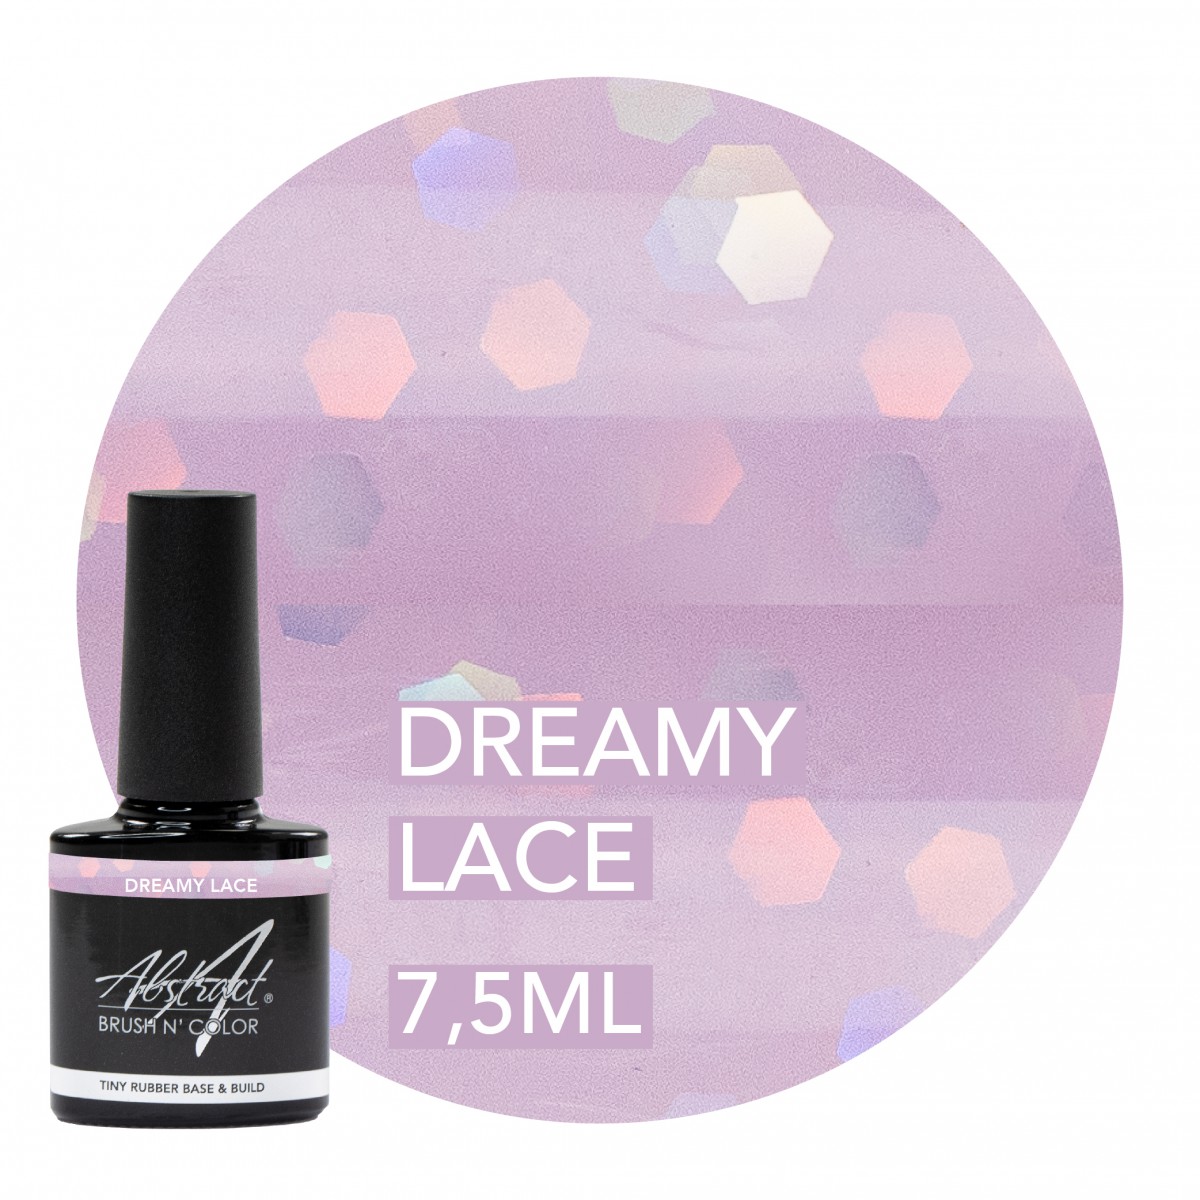 Dreamy Lace Base & Build Gel Abstract